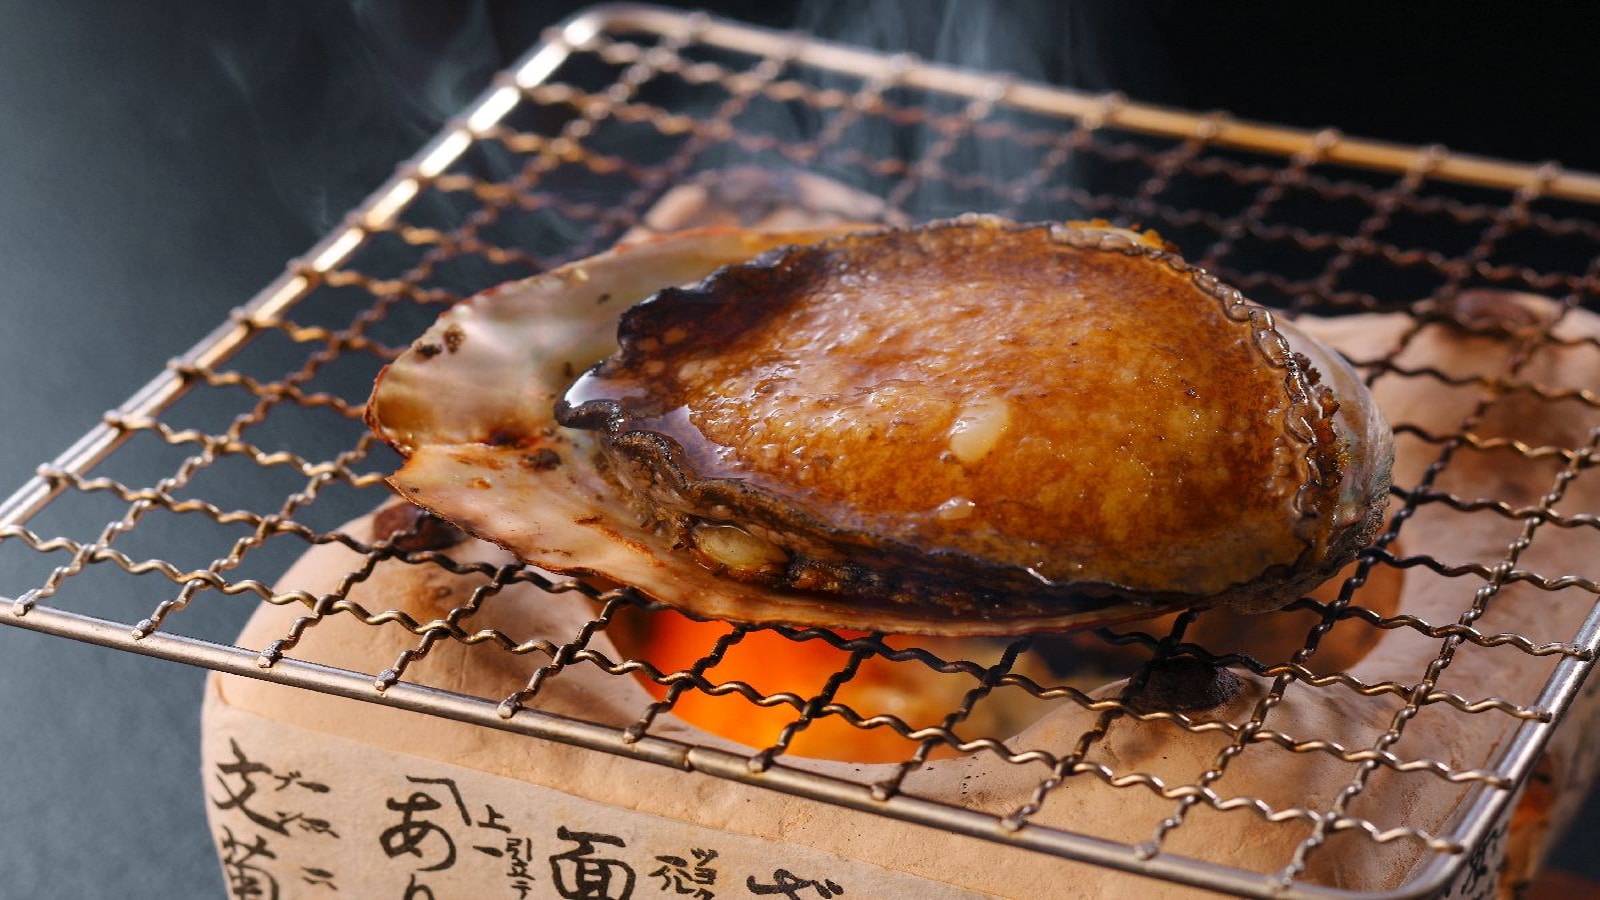 ■ Supper-Dance-grilled abalone- ■ Enjoy a lively abalone